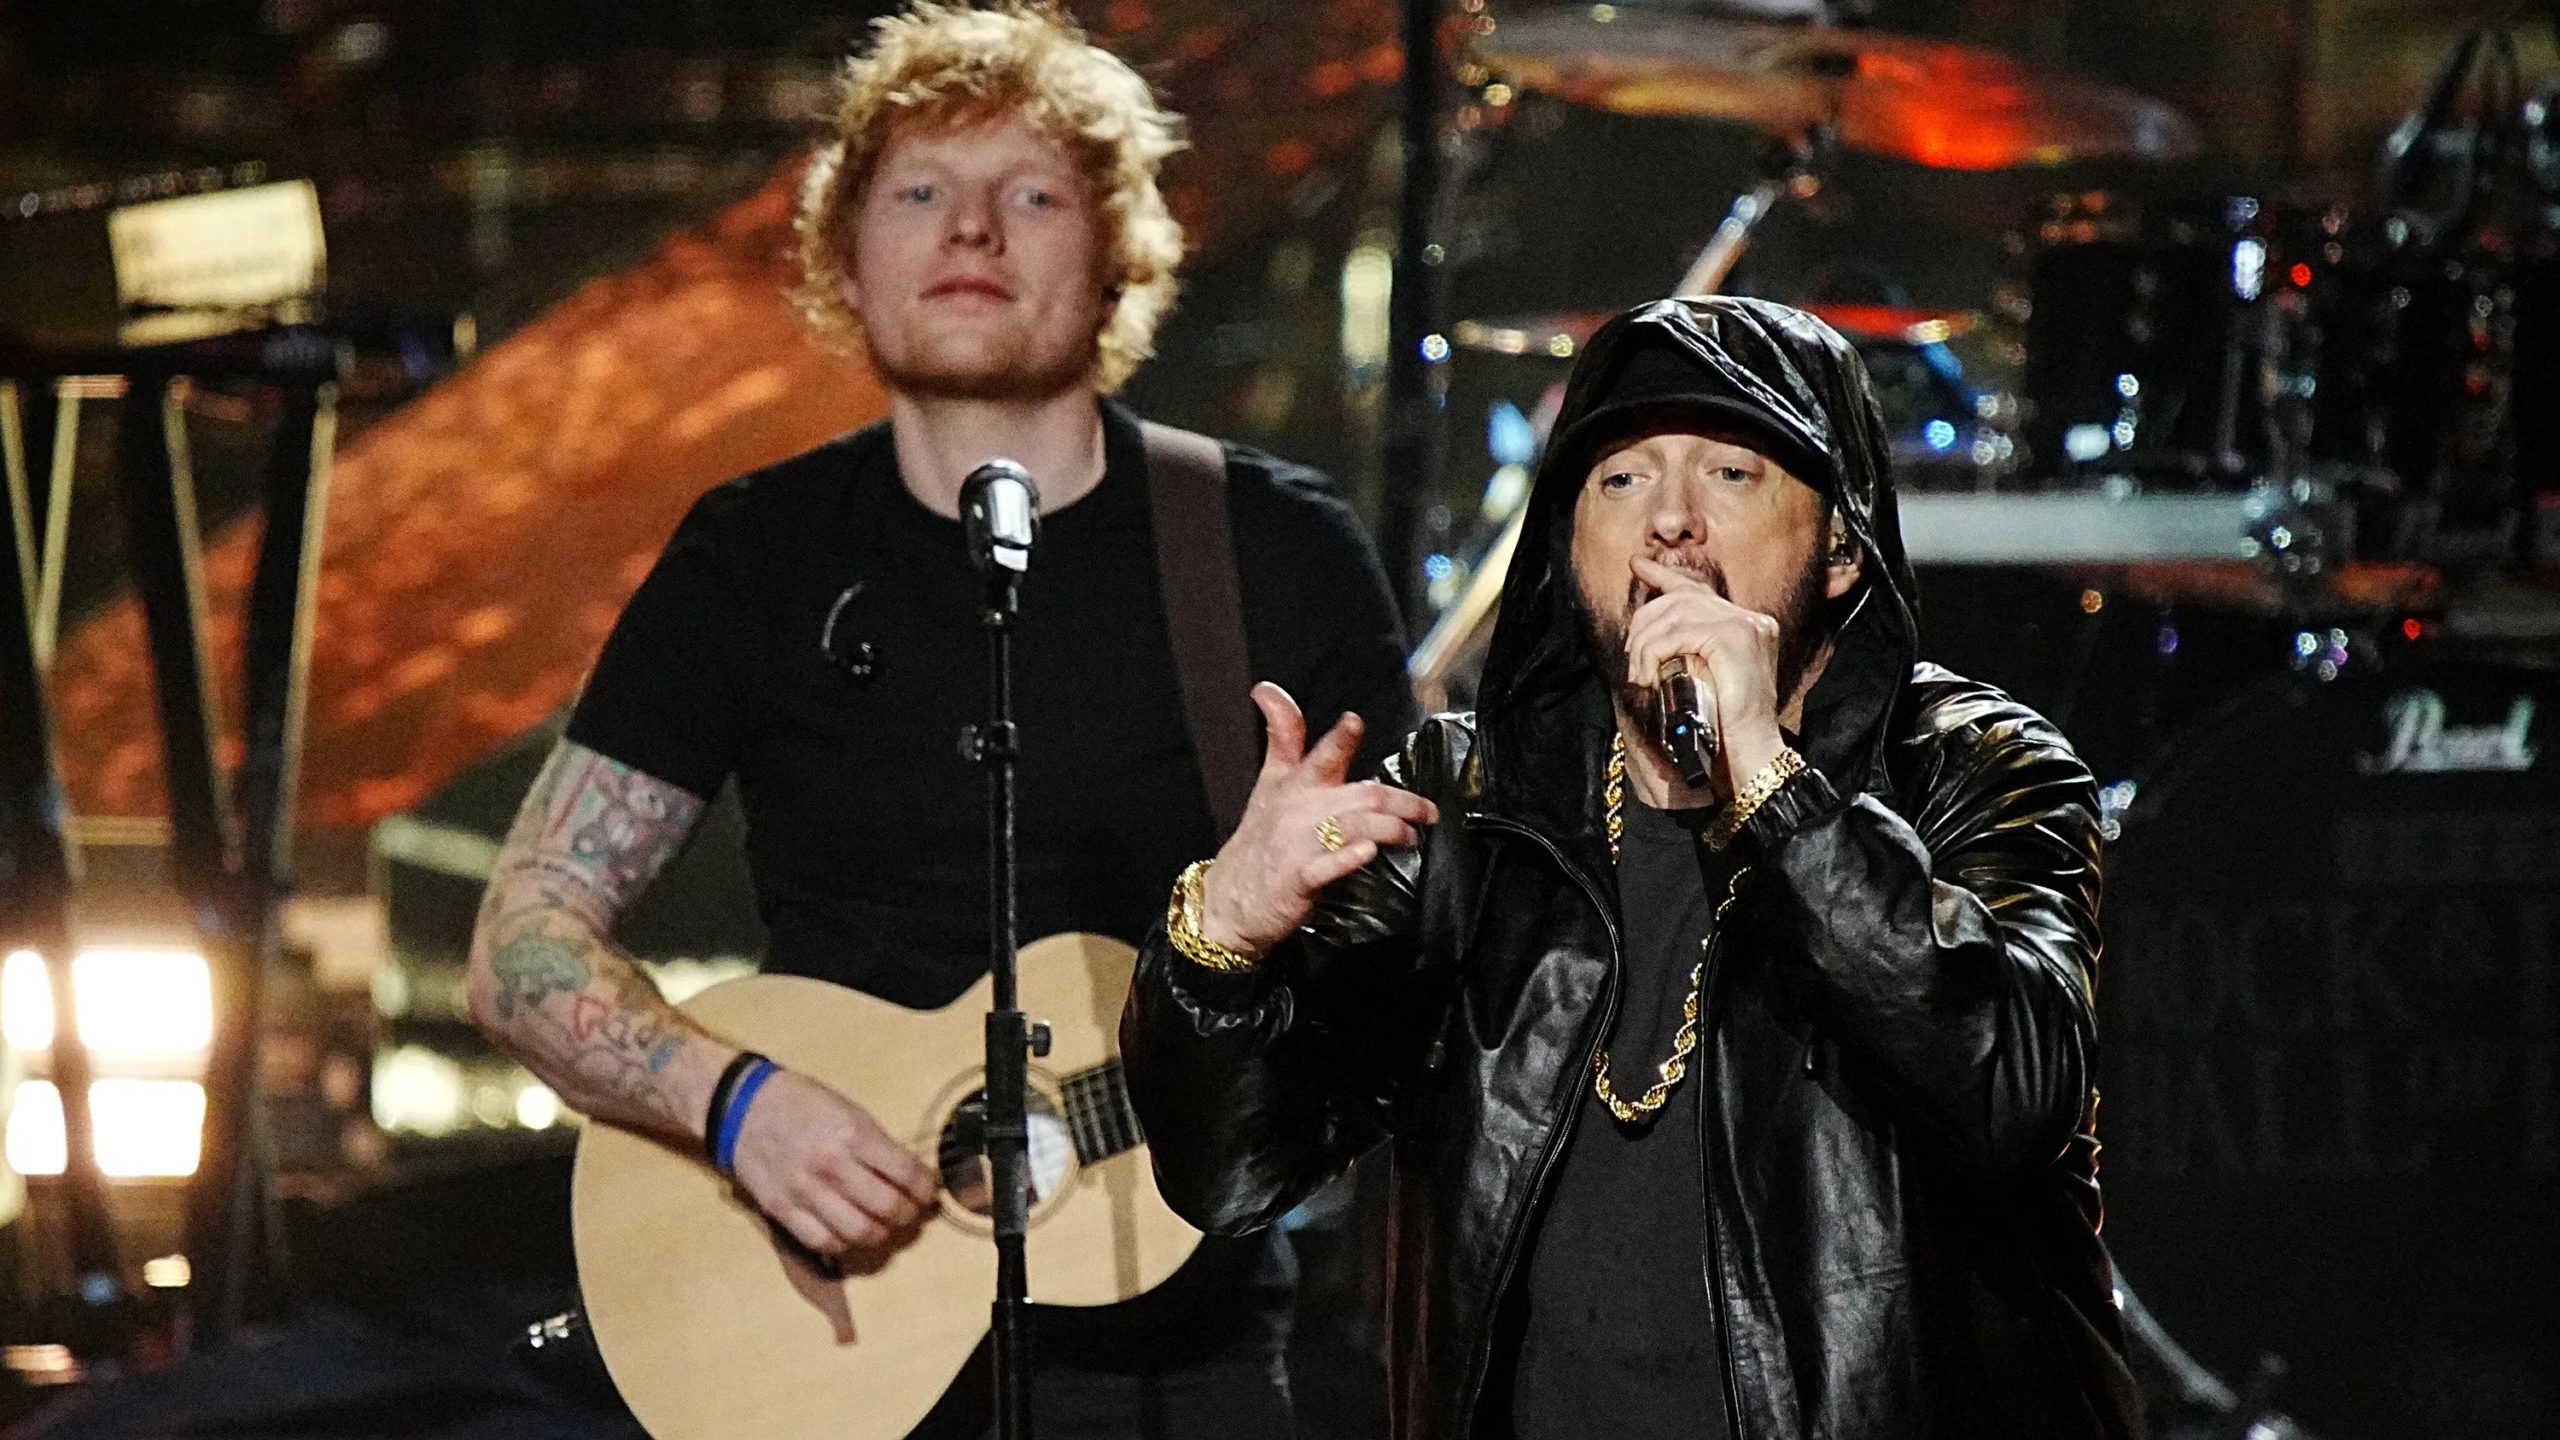 Ed Sheeran and Eminem Performed Live, and Fans Absolutely Loved It